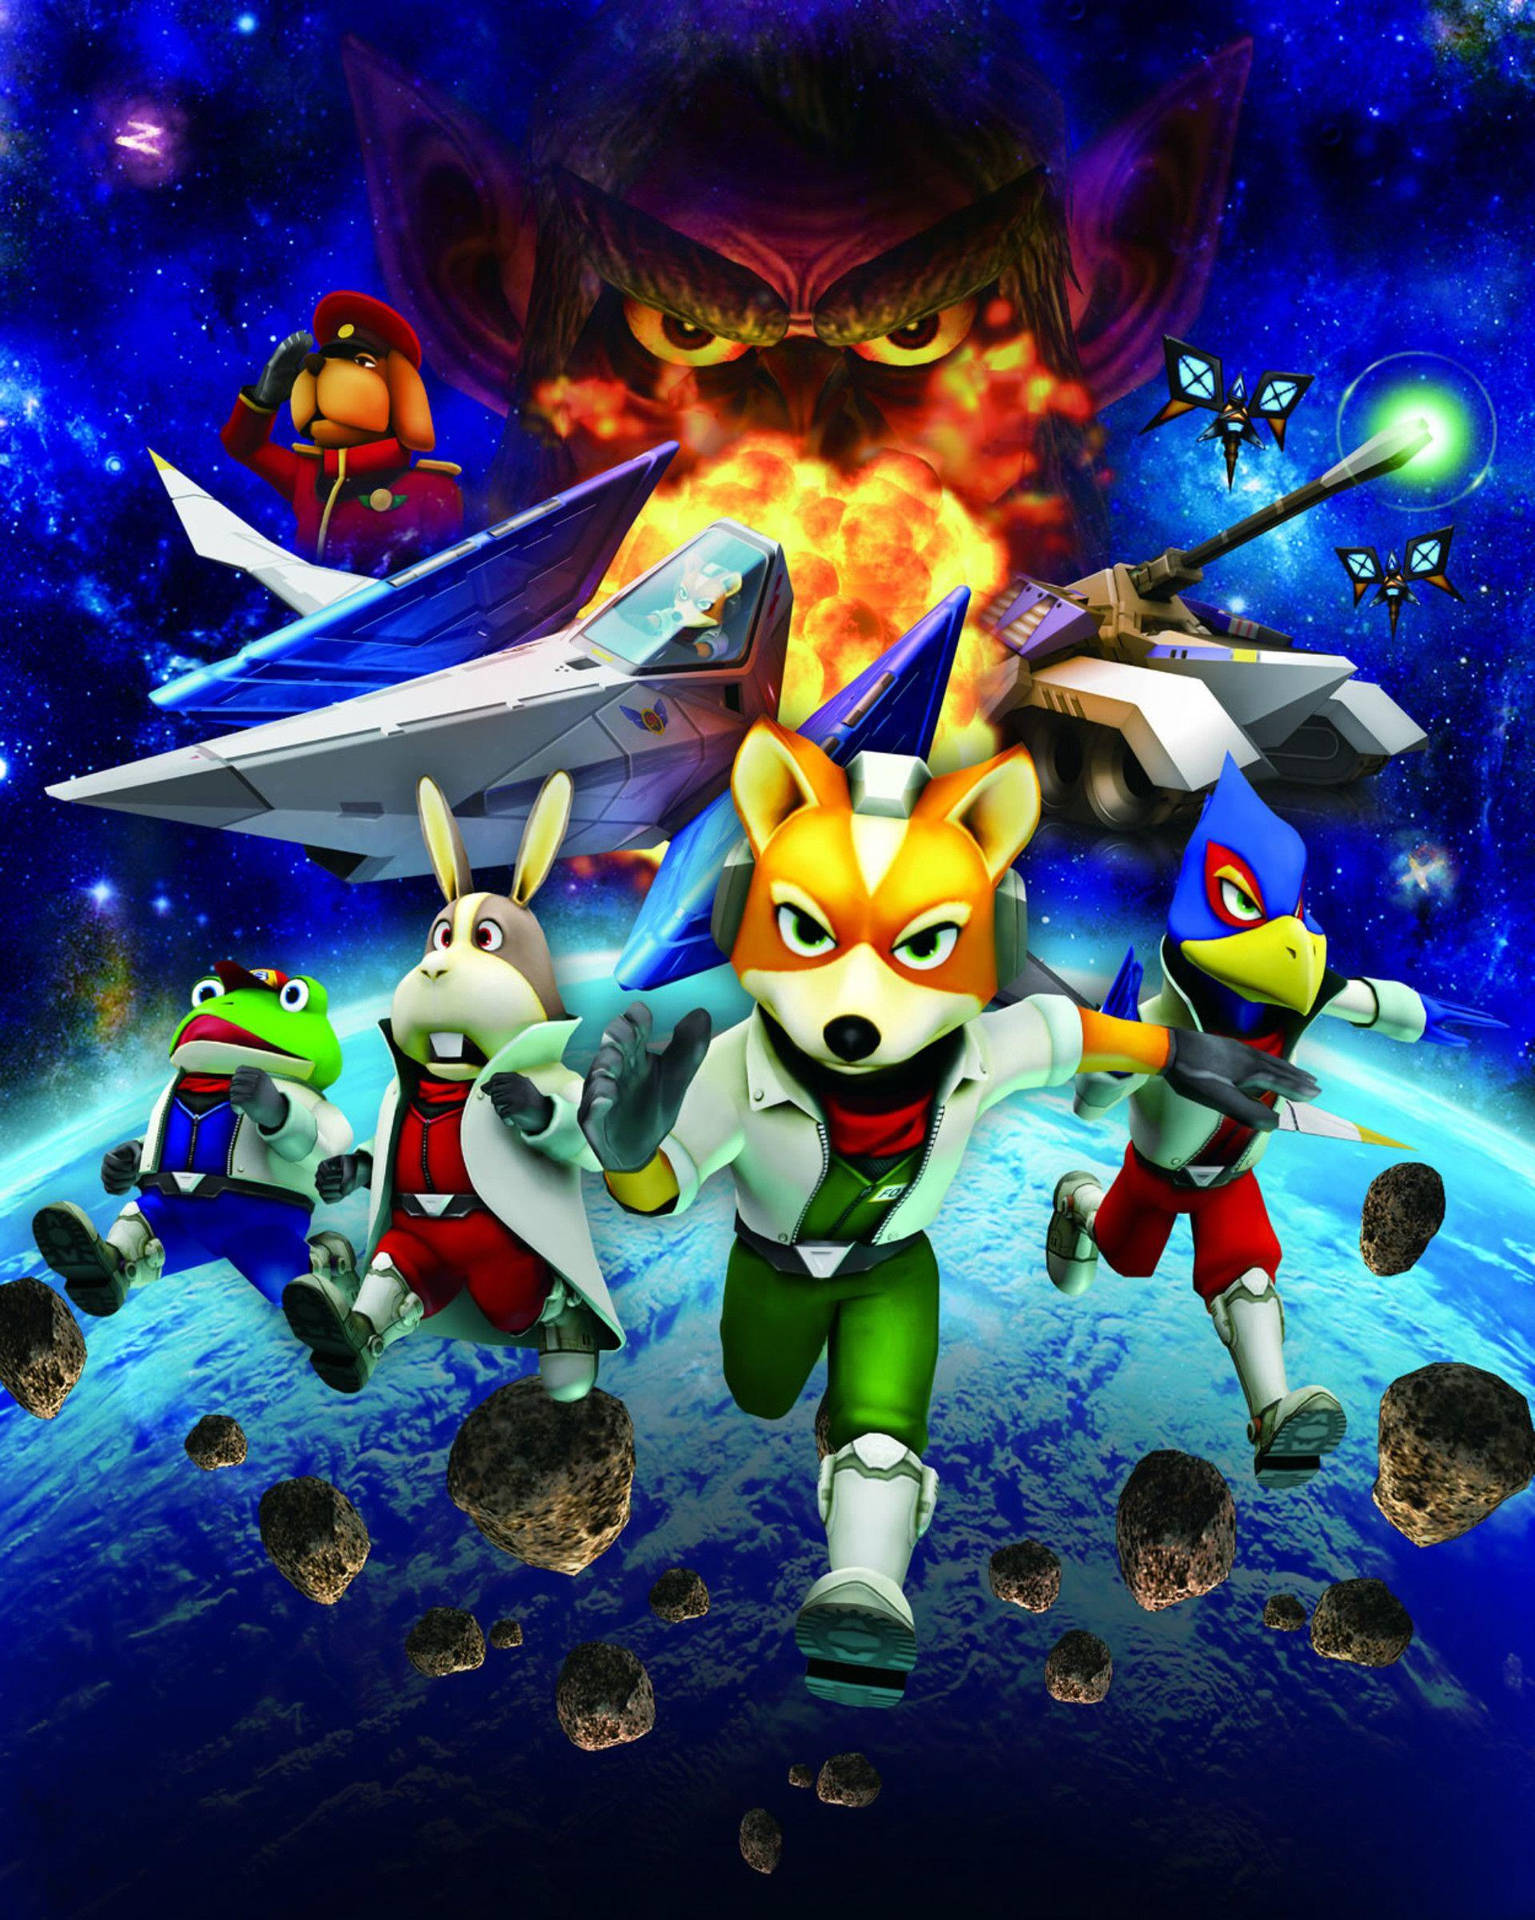 Star Fox Characters Running From Explosion